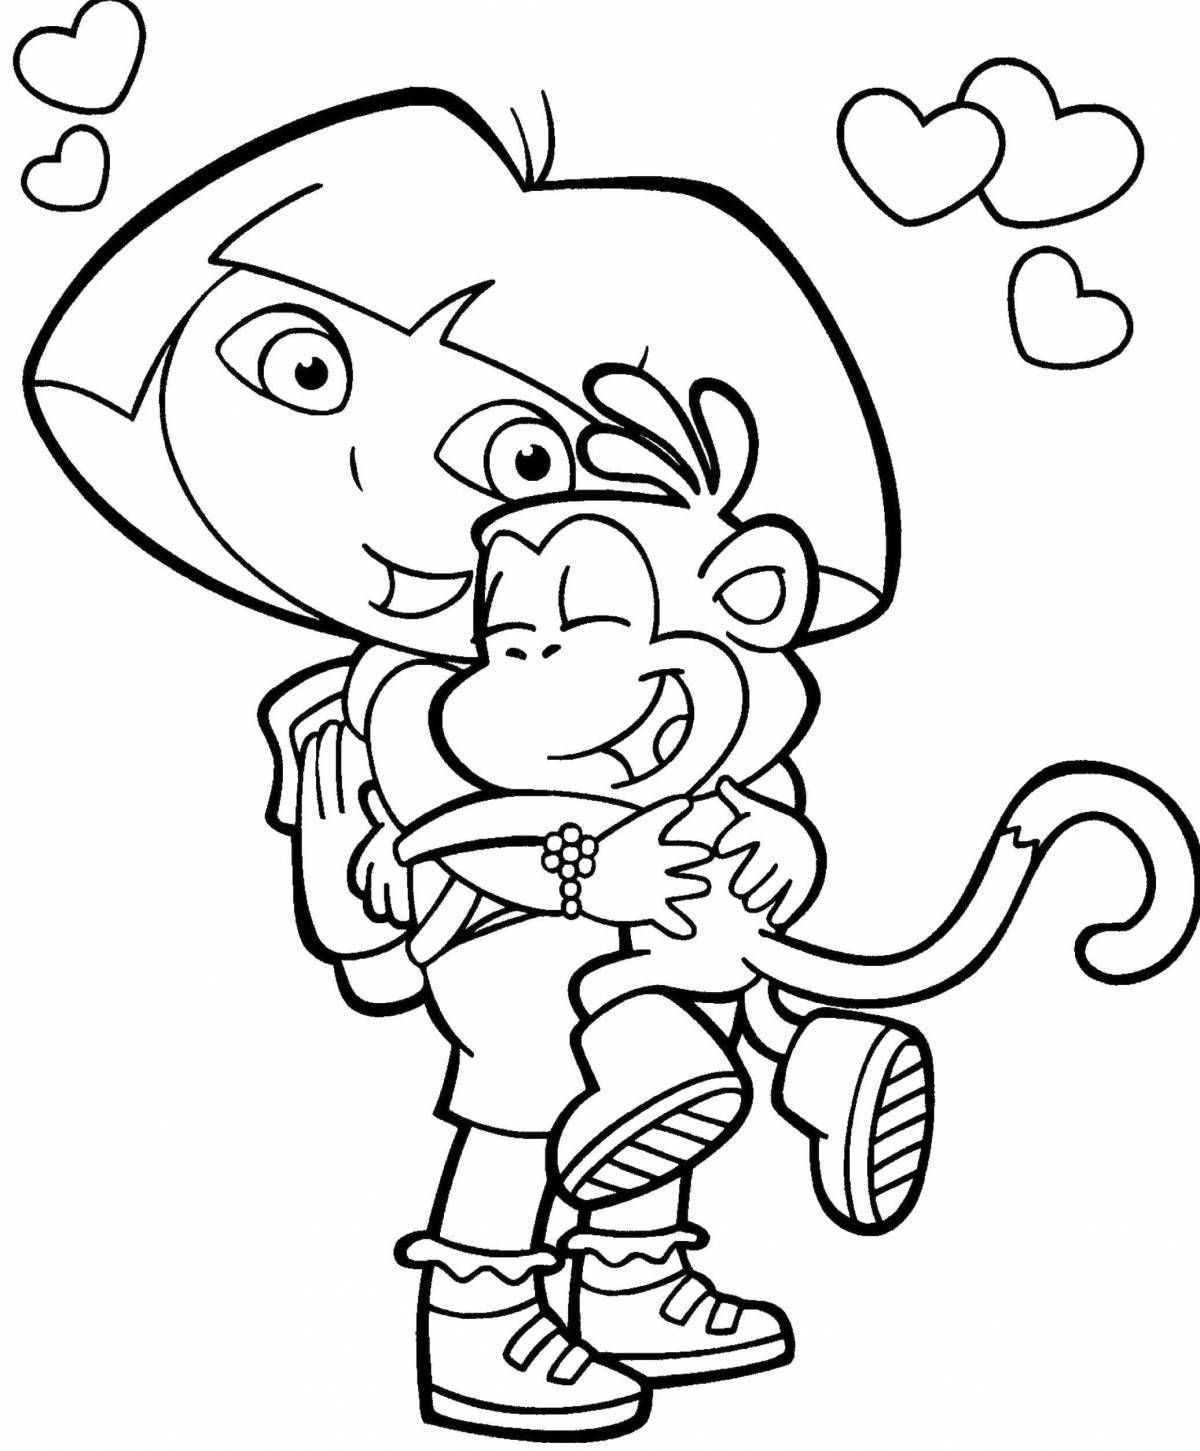 Coloring page of a fun cartoon character